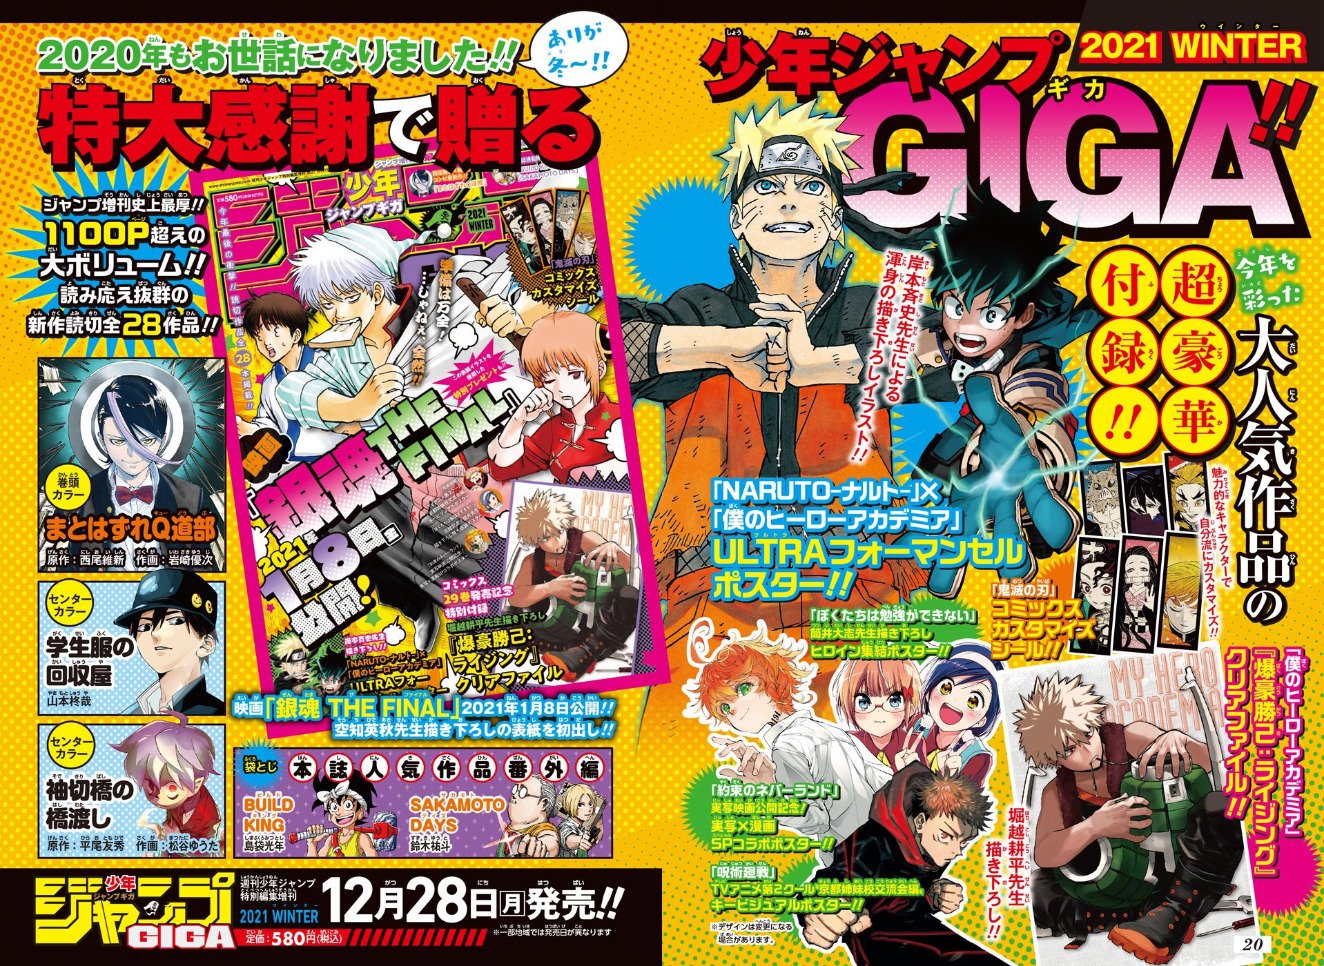 Shonen Jump News Unofficial One Piece Chapter 1000 Promotional Page T Co Lrgmmpr00v Twitter